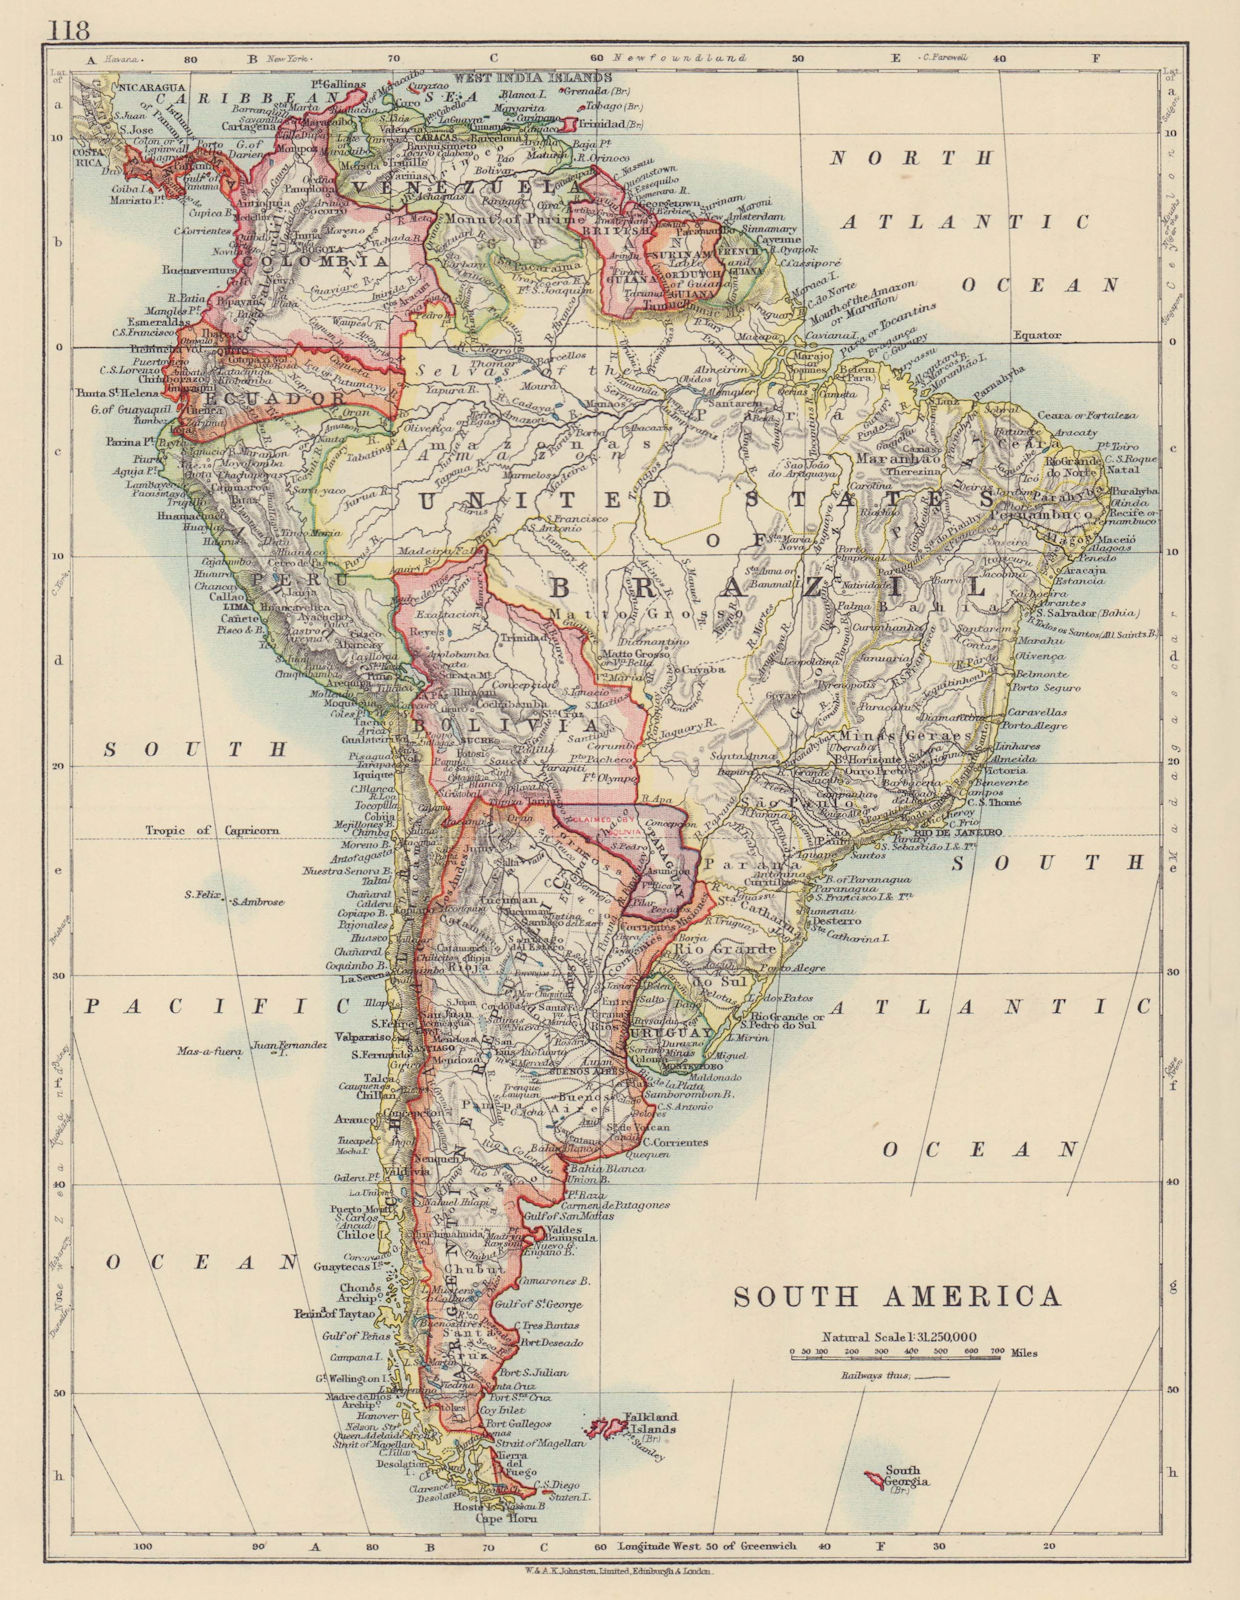 SOUTH AMERICA. Western Paraguay "Claimed by Bolivia". JOHNSTON 1910 old map